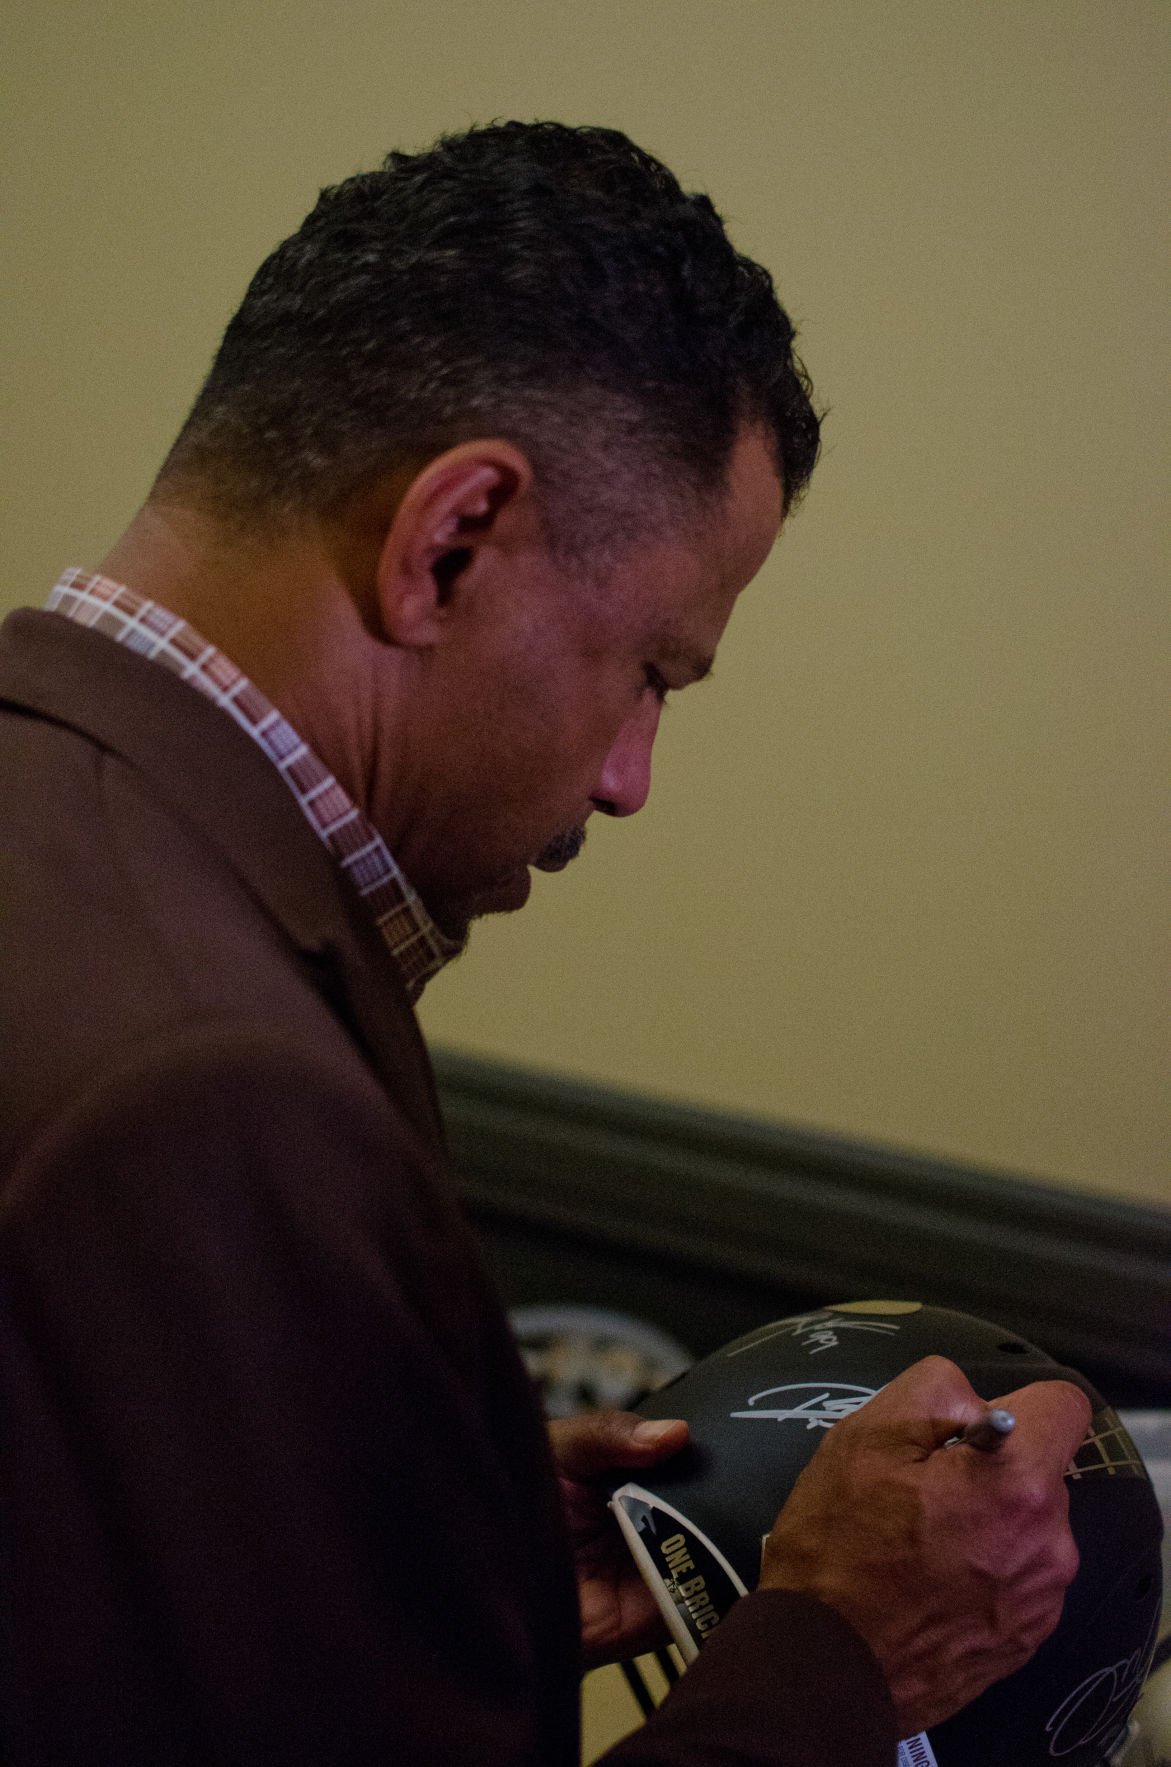 Pro Football Hall of Famer Rod Woodson stops by Ford tent at